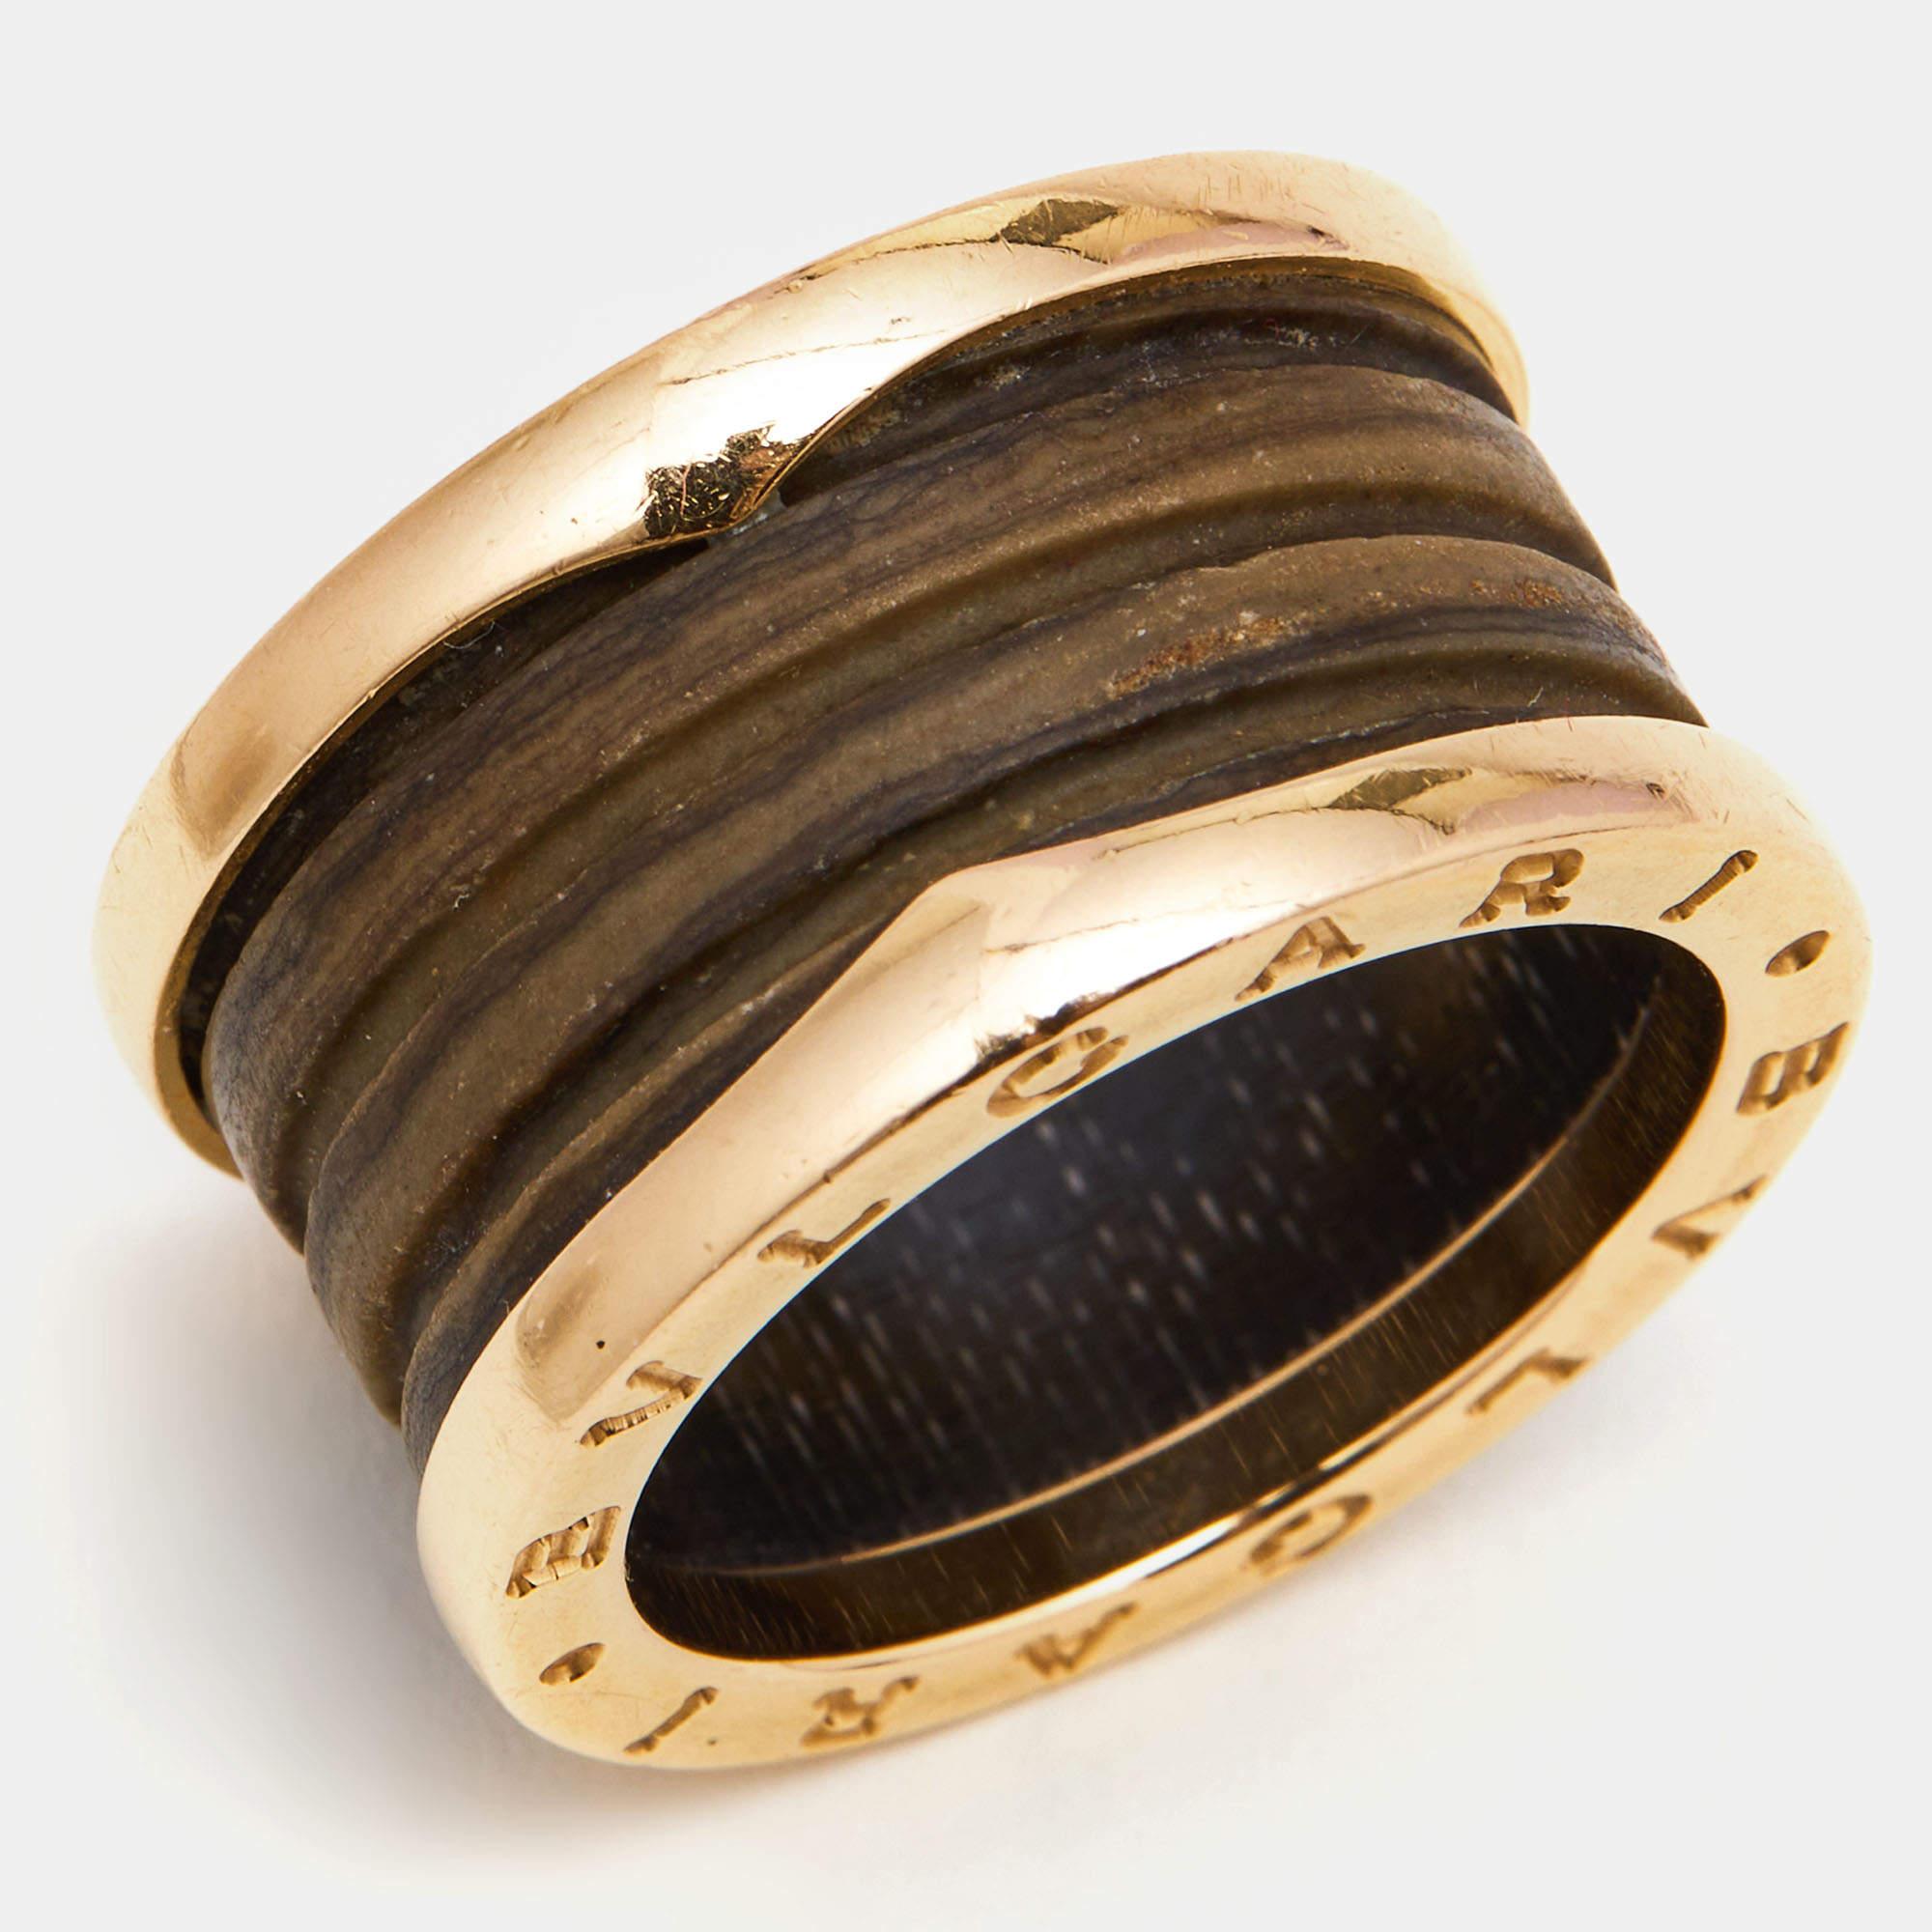 The Bvlgari B.Zero1 ring is a luxurious and elegant piece of jewelry. It features a unique brown marble inlay set in exquisite 18K rose gold, creating a stunning contrast. The ring's design seamlessly combines modern style with timeless beauty,